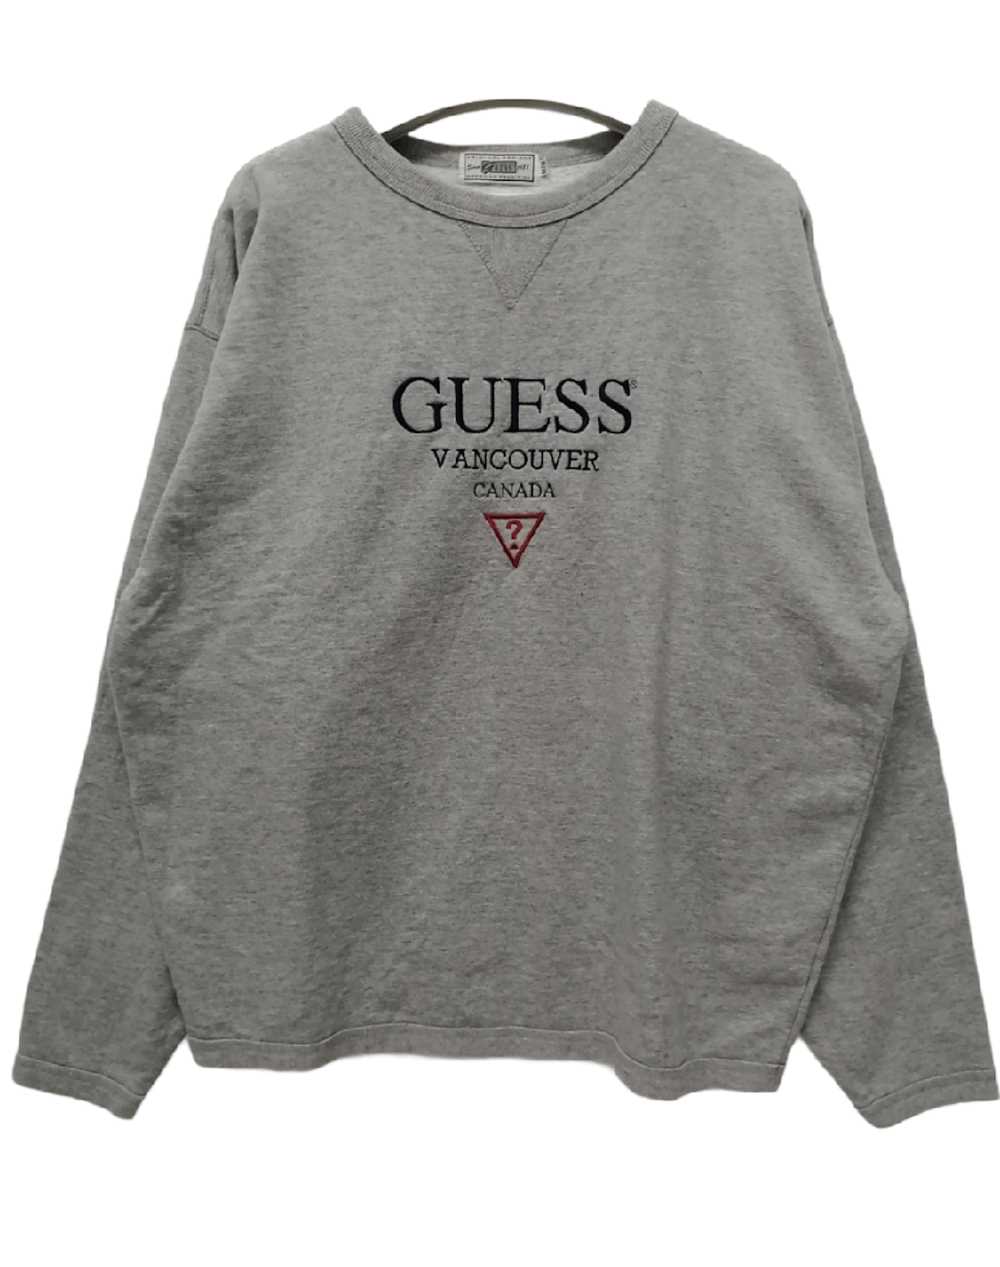 Archival Clothing × Guess × Vintage Rare!! Vintag… - image 1